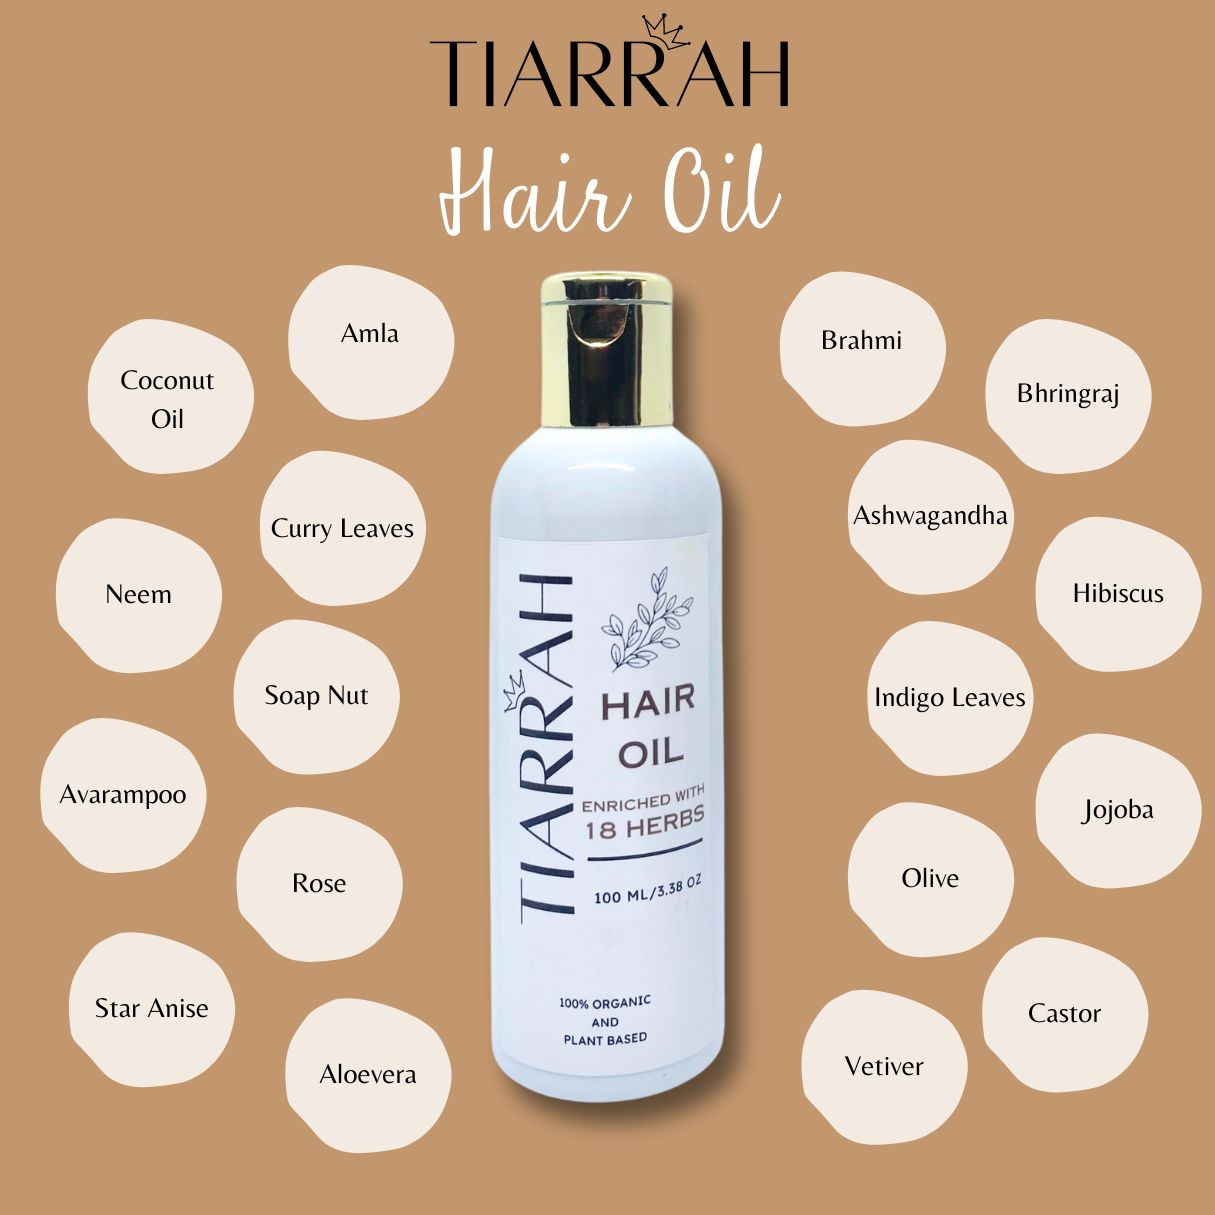 Organic Hair Oil from Tiarrah: Non-Toxic, 18 Herbs - The Luxury Bath and Body Care Shop